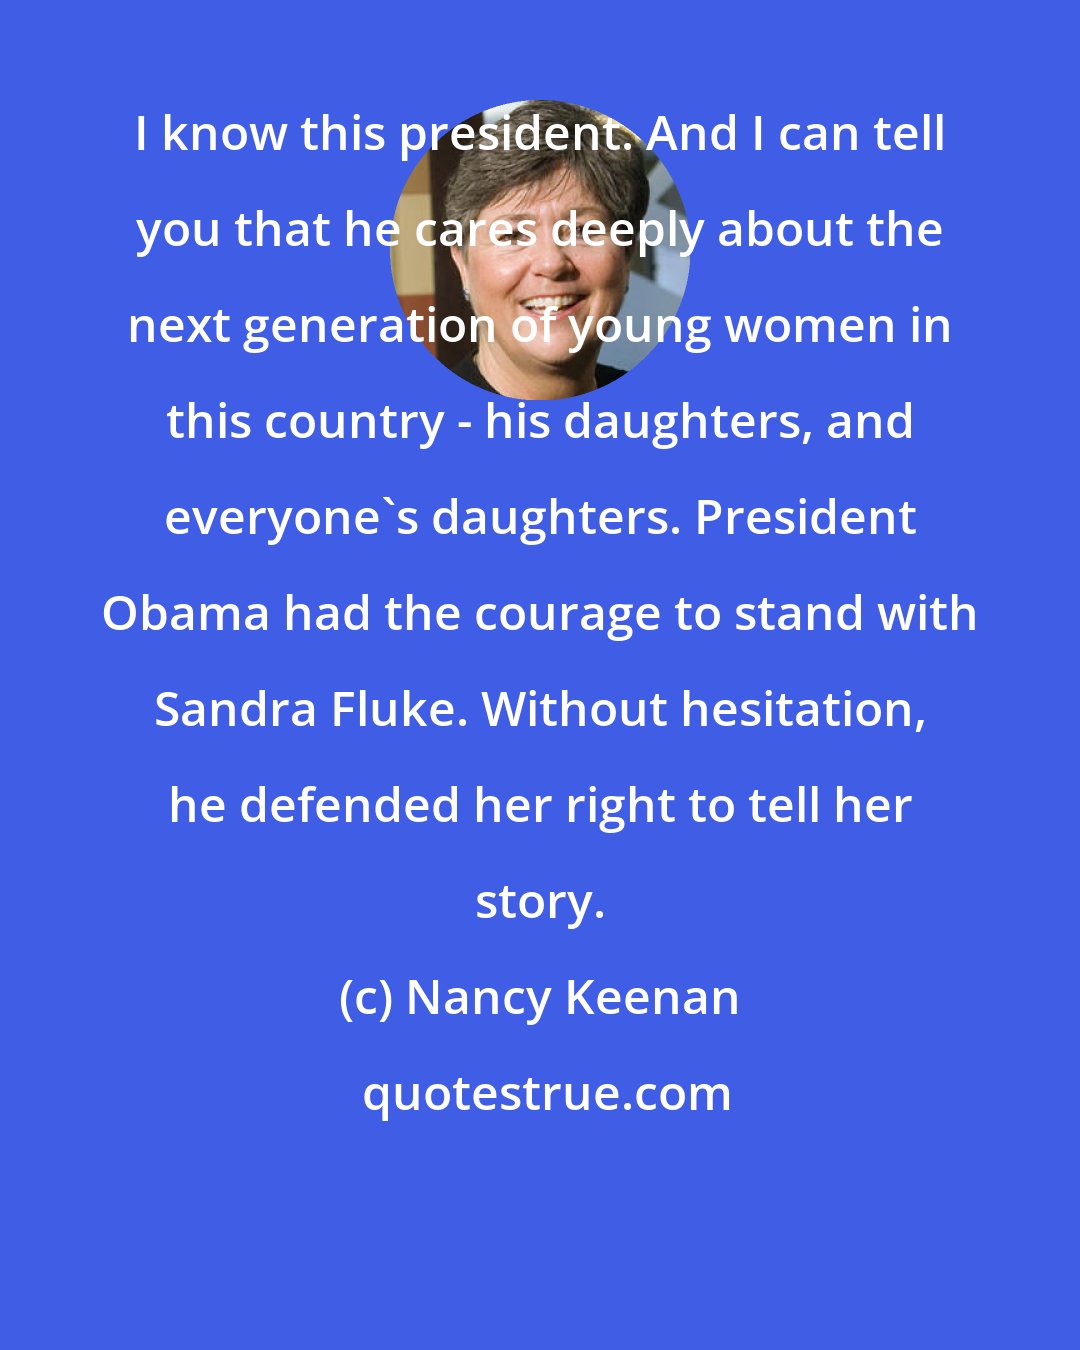 Nancy Keenan: I know this president. And I can tell you that he cares deeply about the next generation of young women in this country - his daughters, and everyone's daughters. President Obama had the courage to stand with Sandra Fluke. Without hesitation, he defended her right to tell her story.